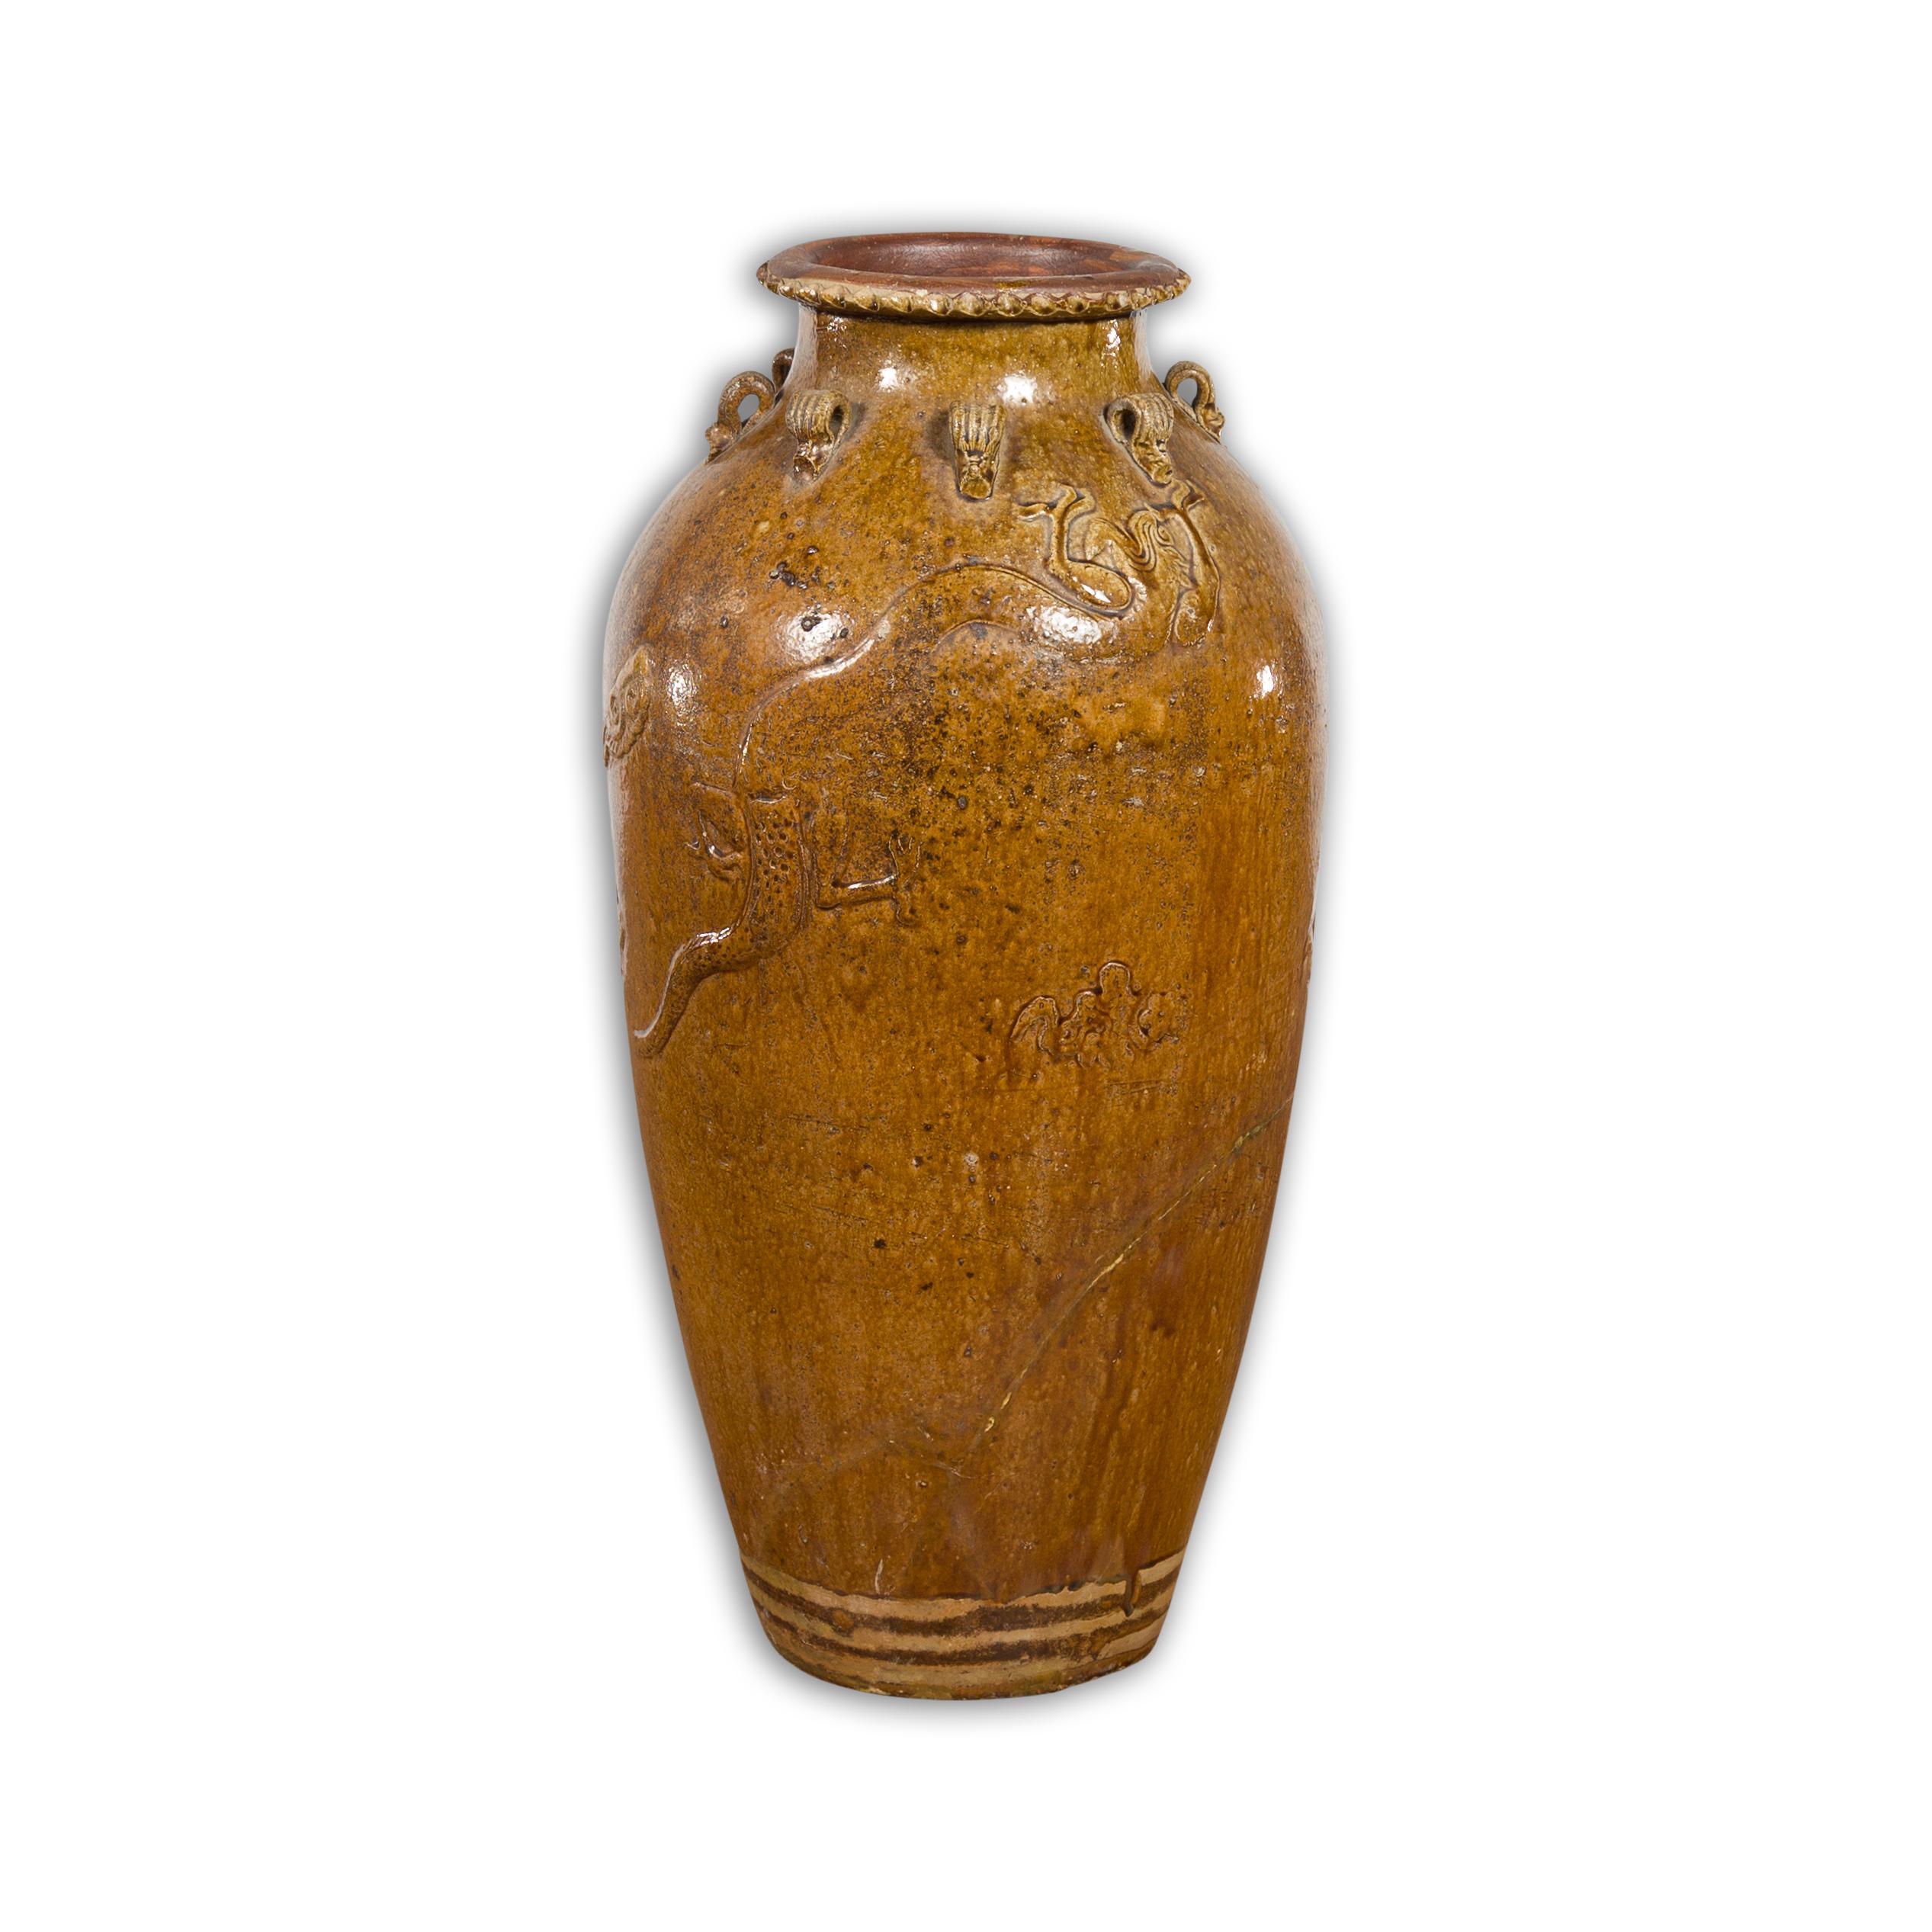 Tall Antique Qing Dynasty Period Martaban Jar from China, 18th-19th Century For Sale 11